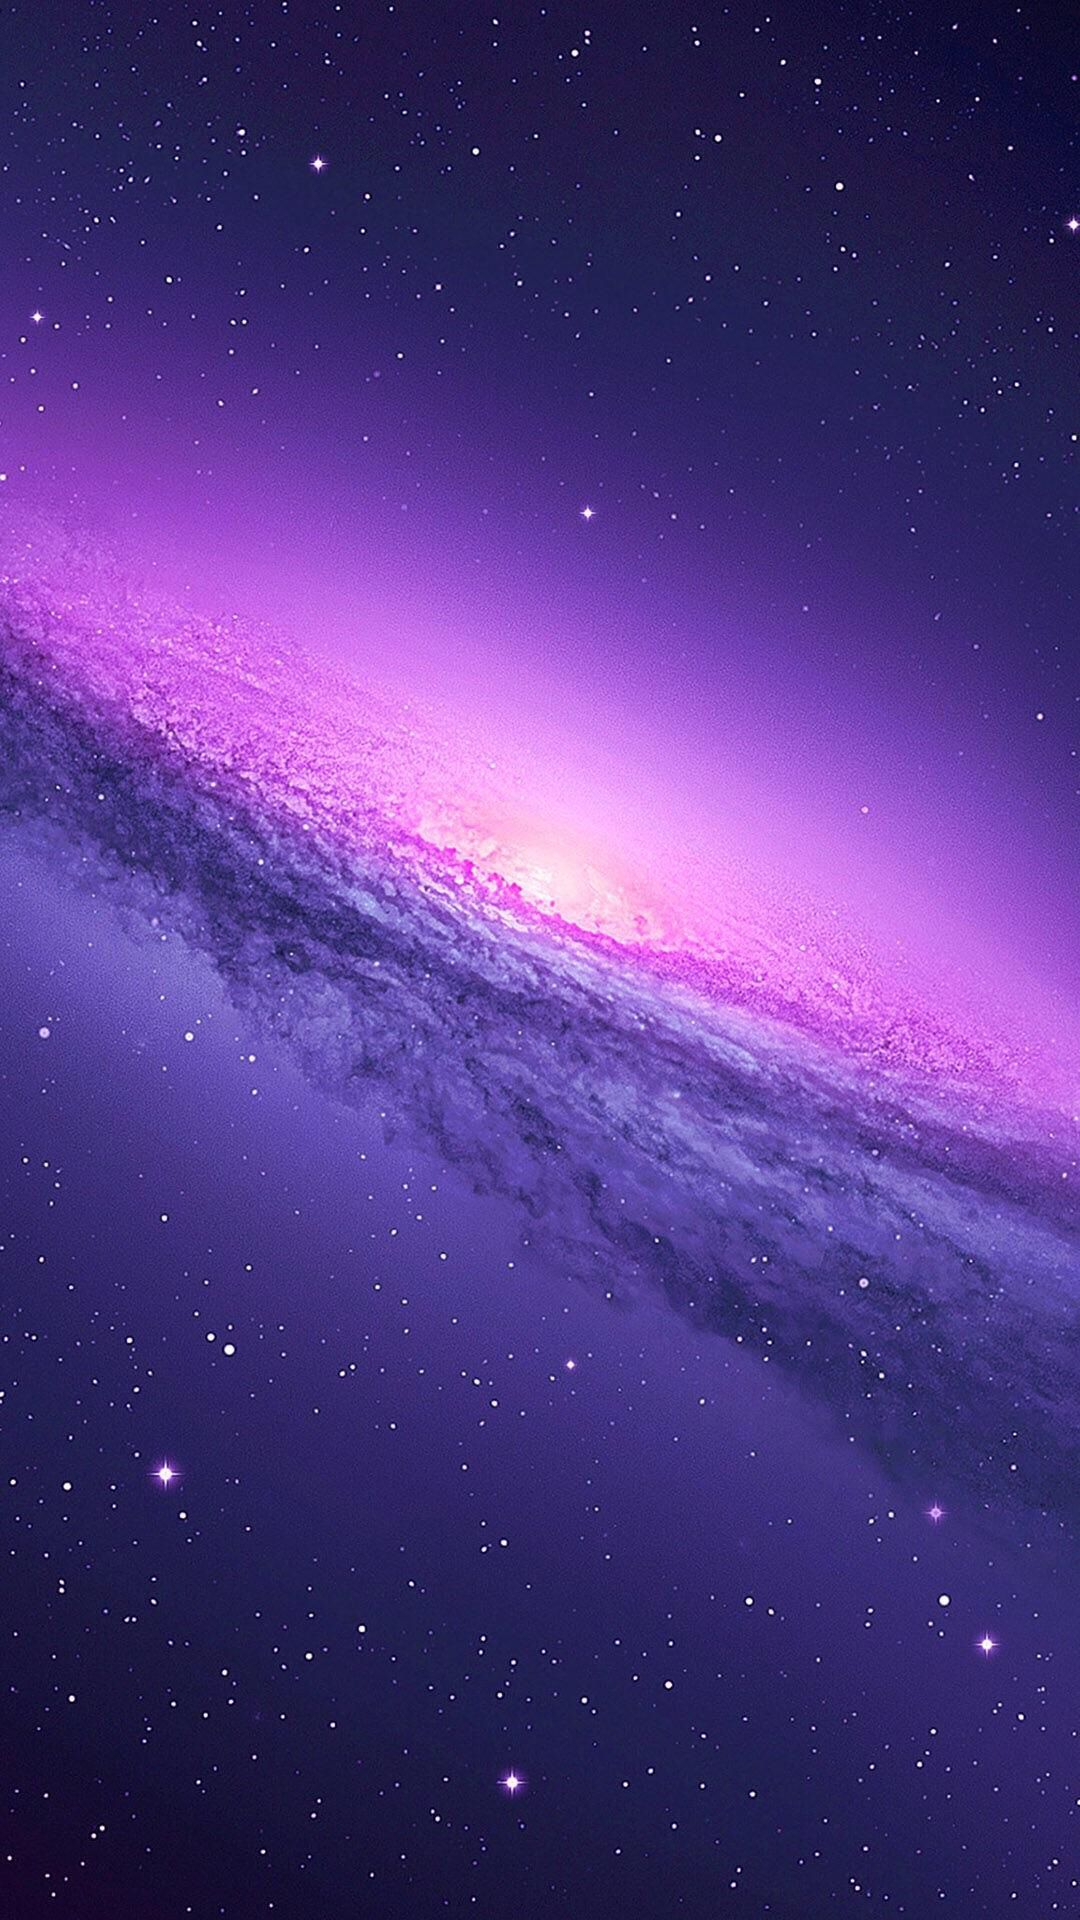 1080x1920 Pin by Erin on Patterns/Wallpaper | Purple galaxy wallpaper, Cool galaxy wallpapers, Iphone 6 wallpaper backgrounds